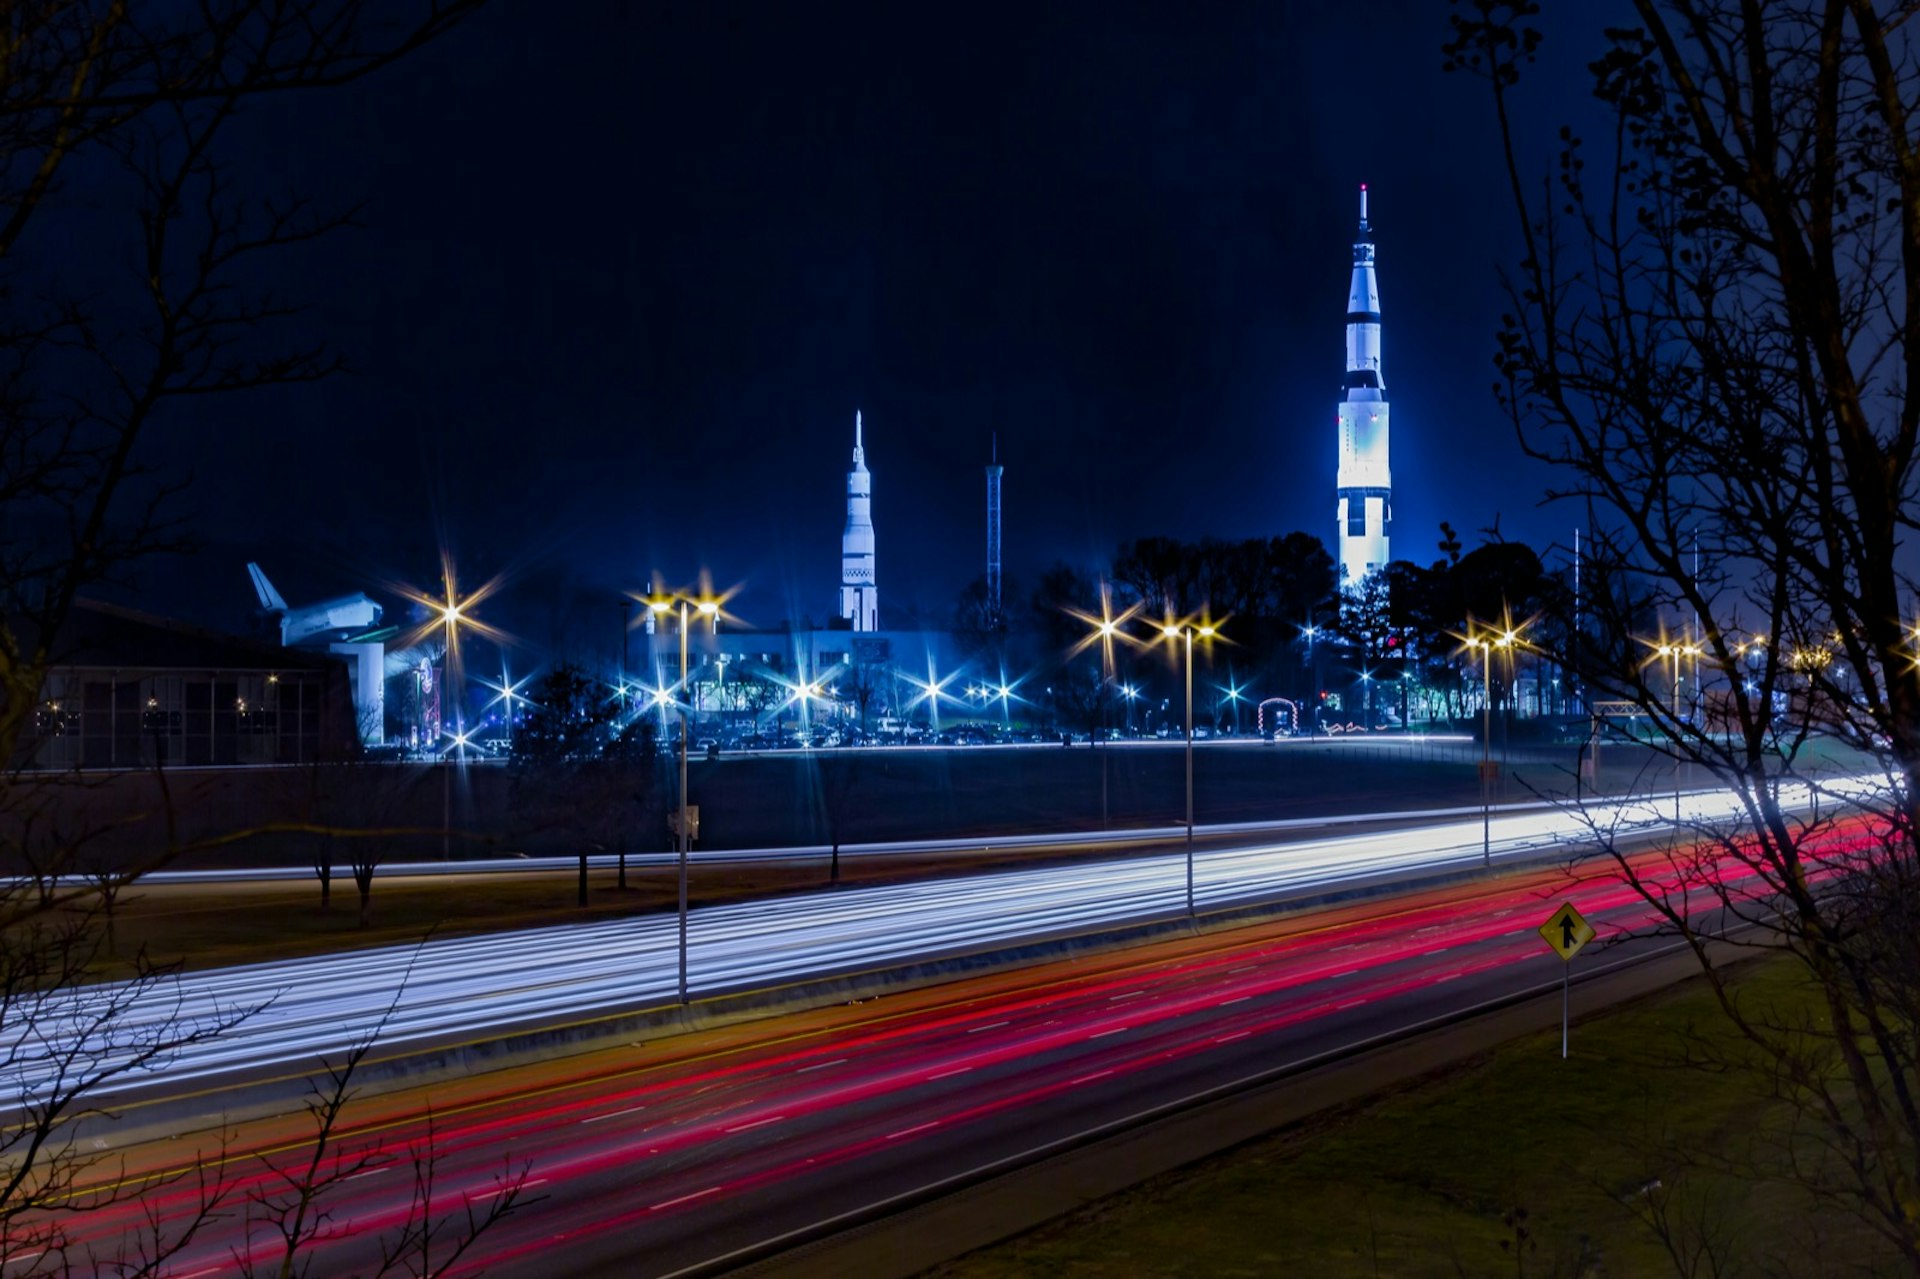 A long exposure shot of US Space and Rocket Center Huntsville, AL with highway traffic. There are parallel streaks of red and white from the car lights in the foreground and the white, needle-like shuttles are visible in the background; Apollo anniversary experiences